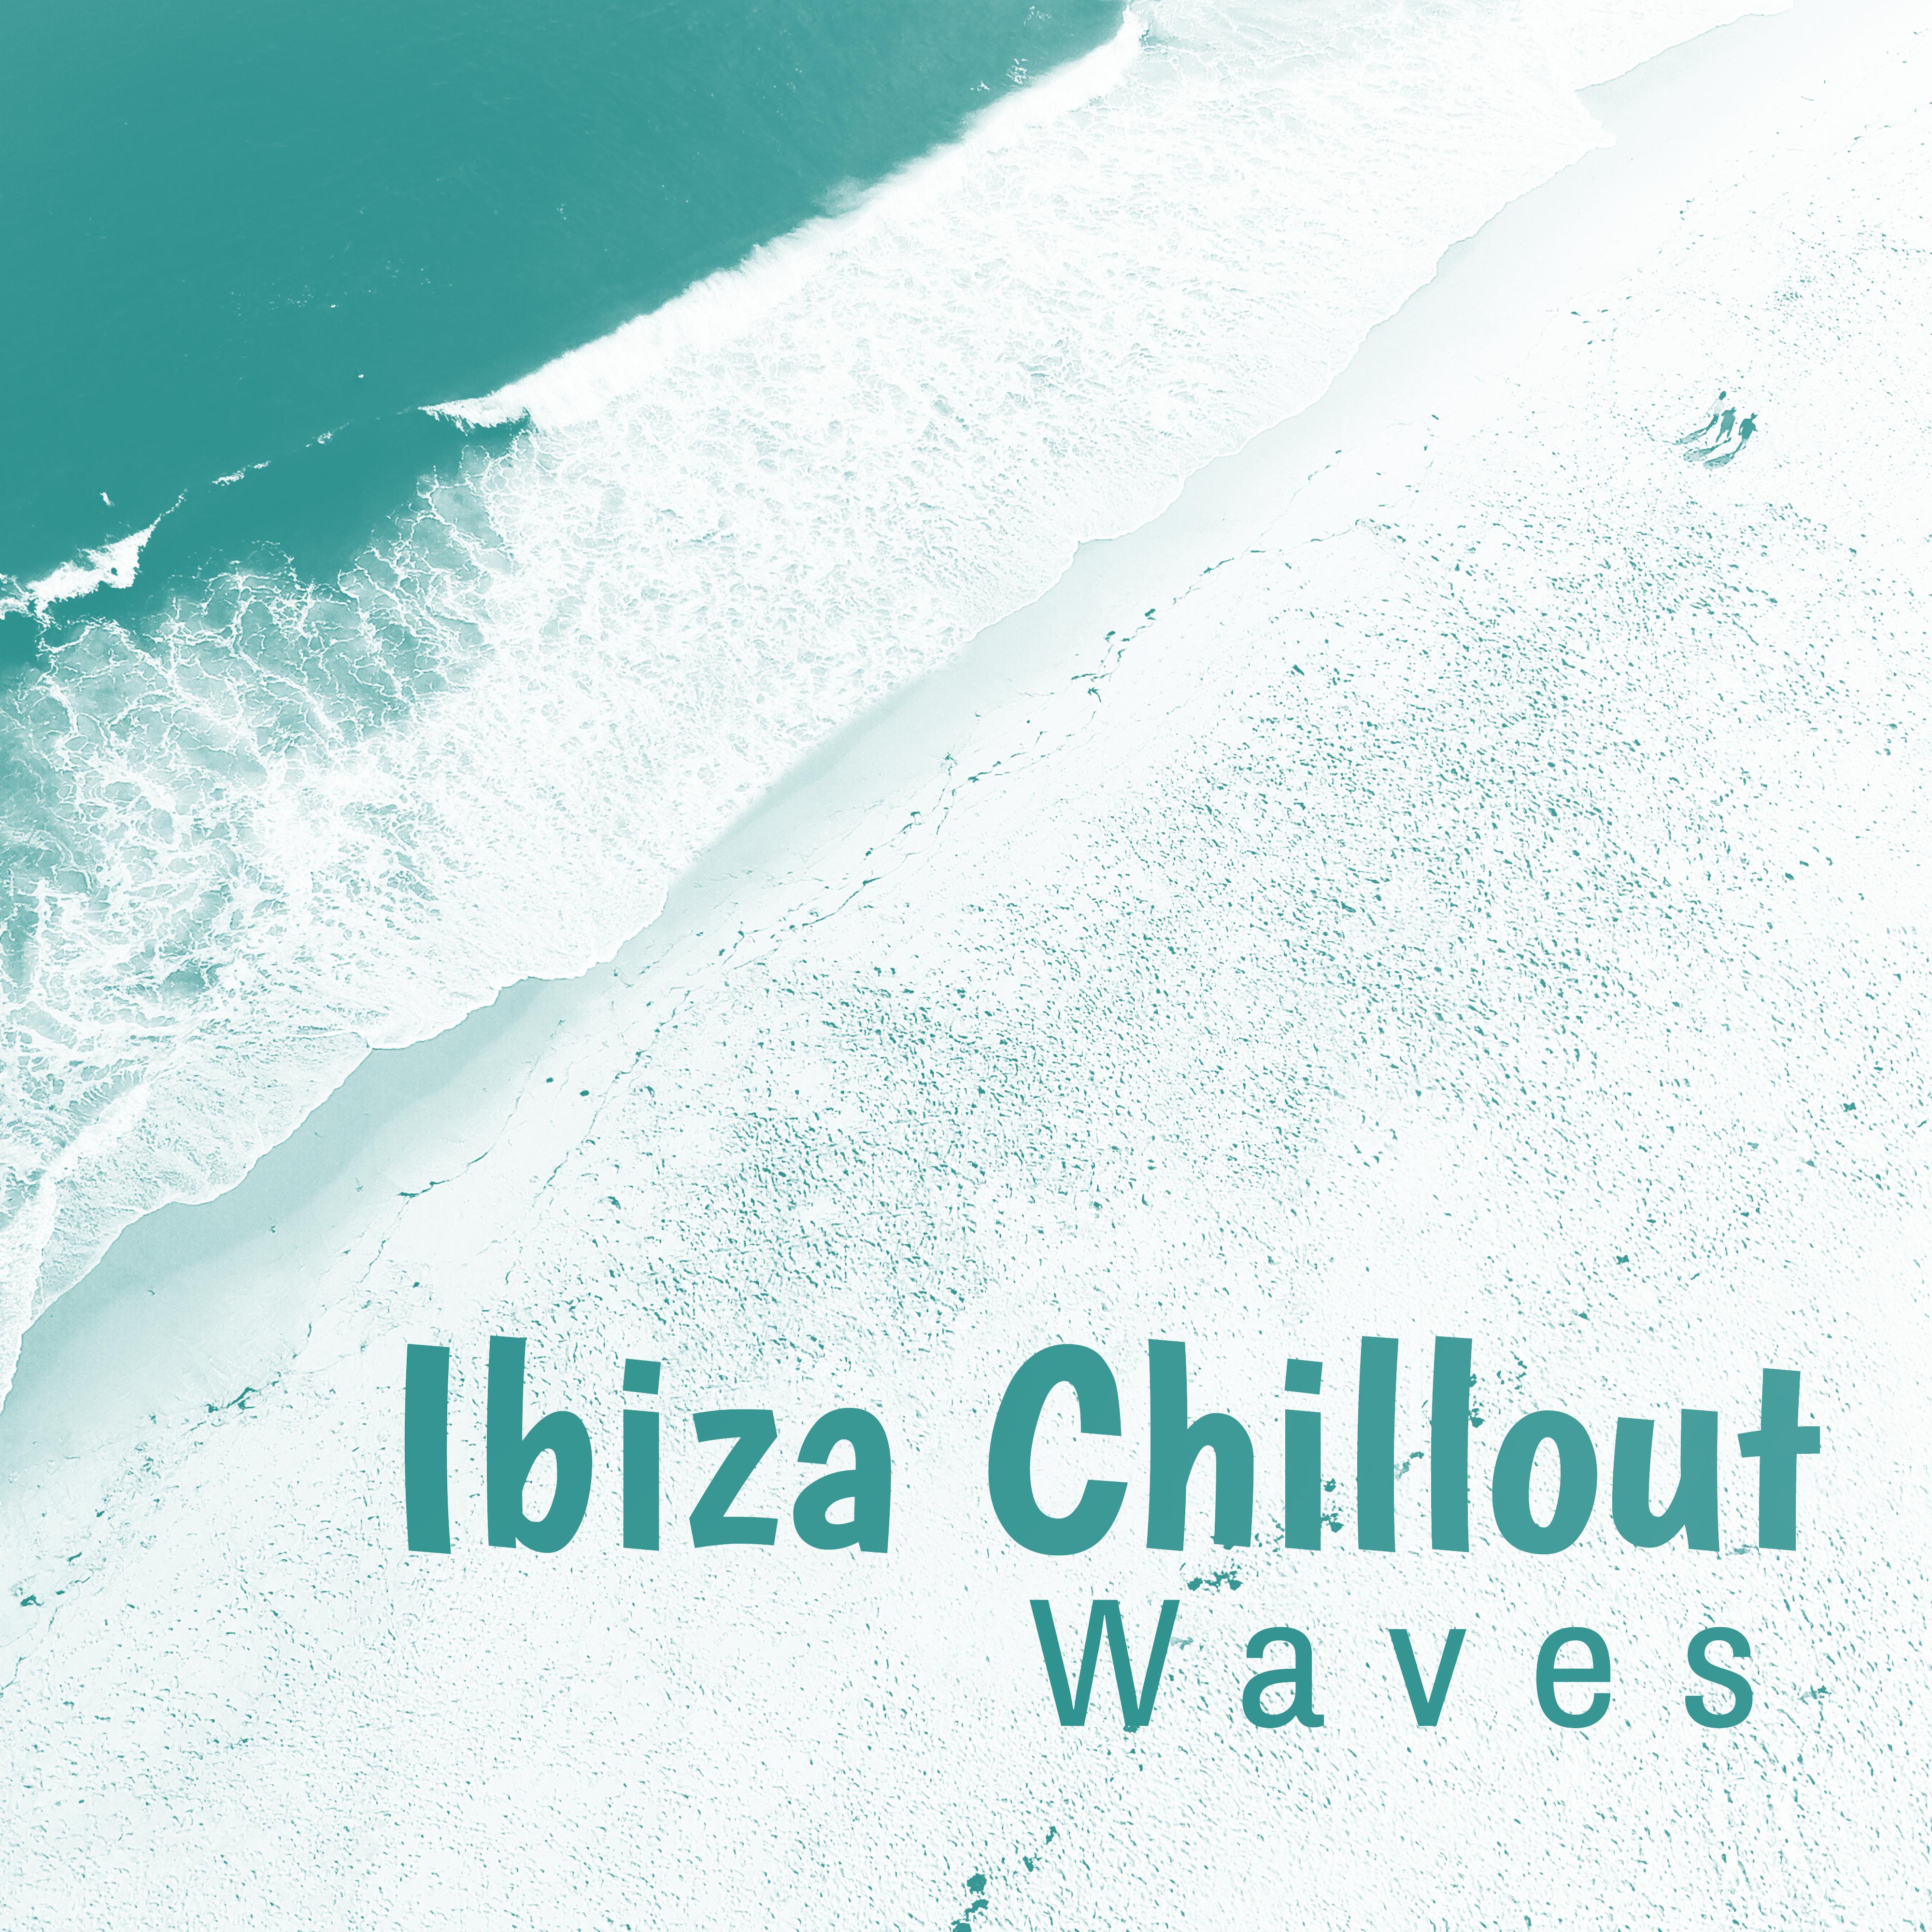 Ibiza Chillout Waves  Summer Relaxation, Peaceful Chill Out Music, Rest a Bit, Sounds of Holiday